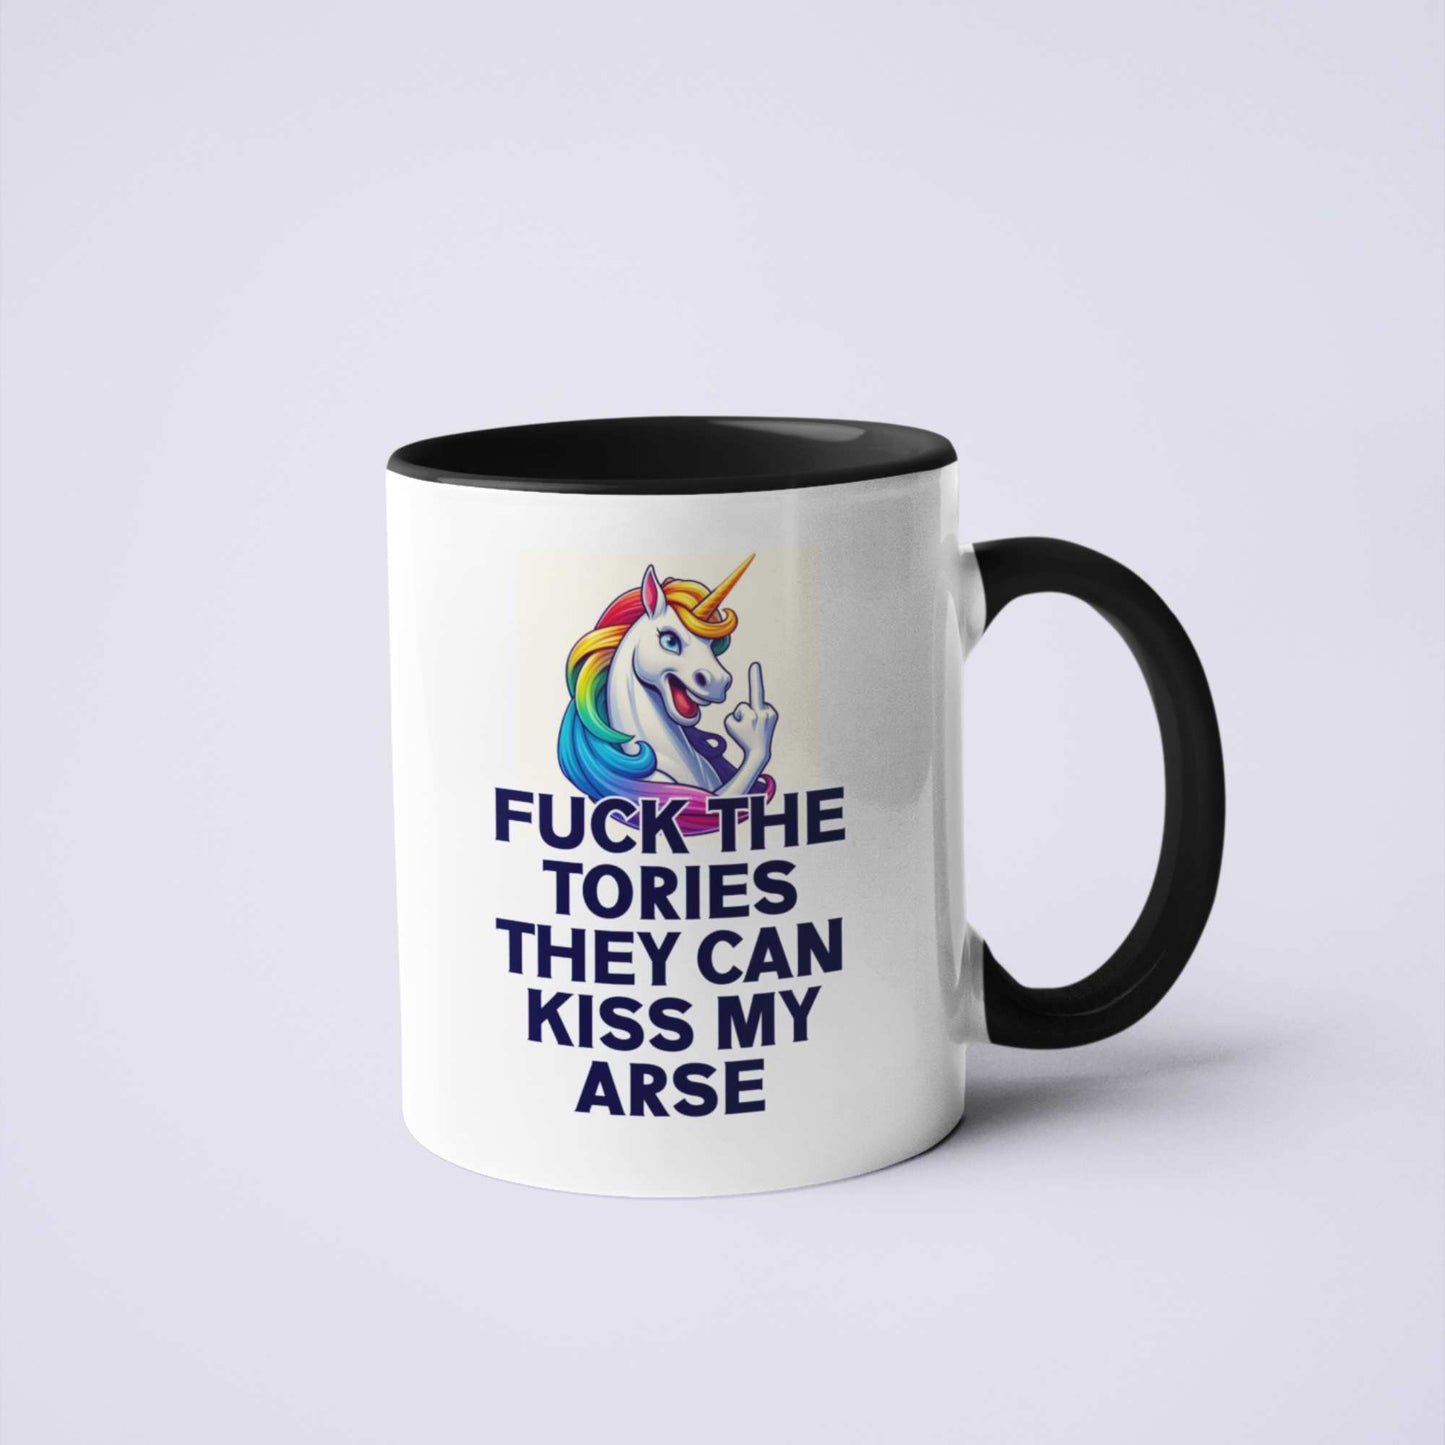 Fuck the Tories They Can Kiss My Arse Collection – Personalised Mugs UK, Funny Tumblers for Work, Humorous Coasters